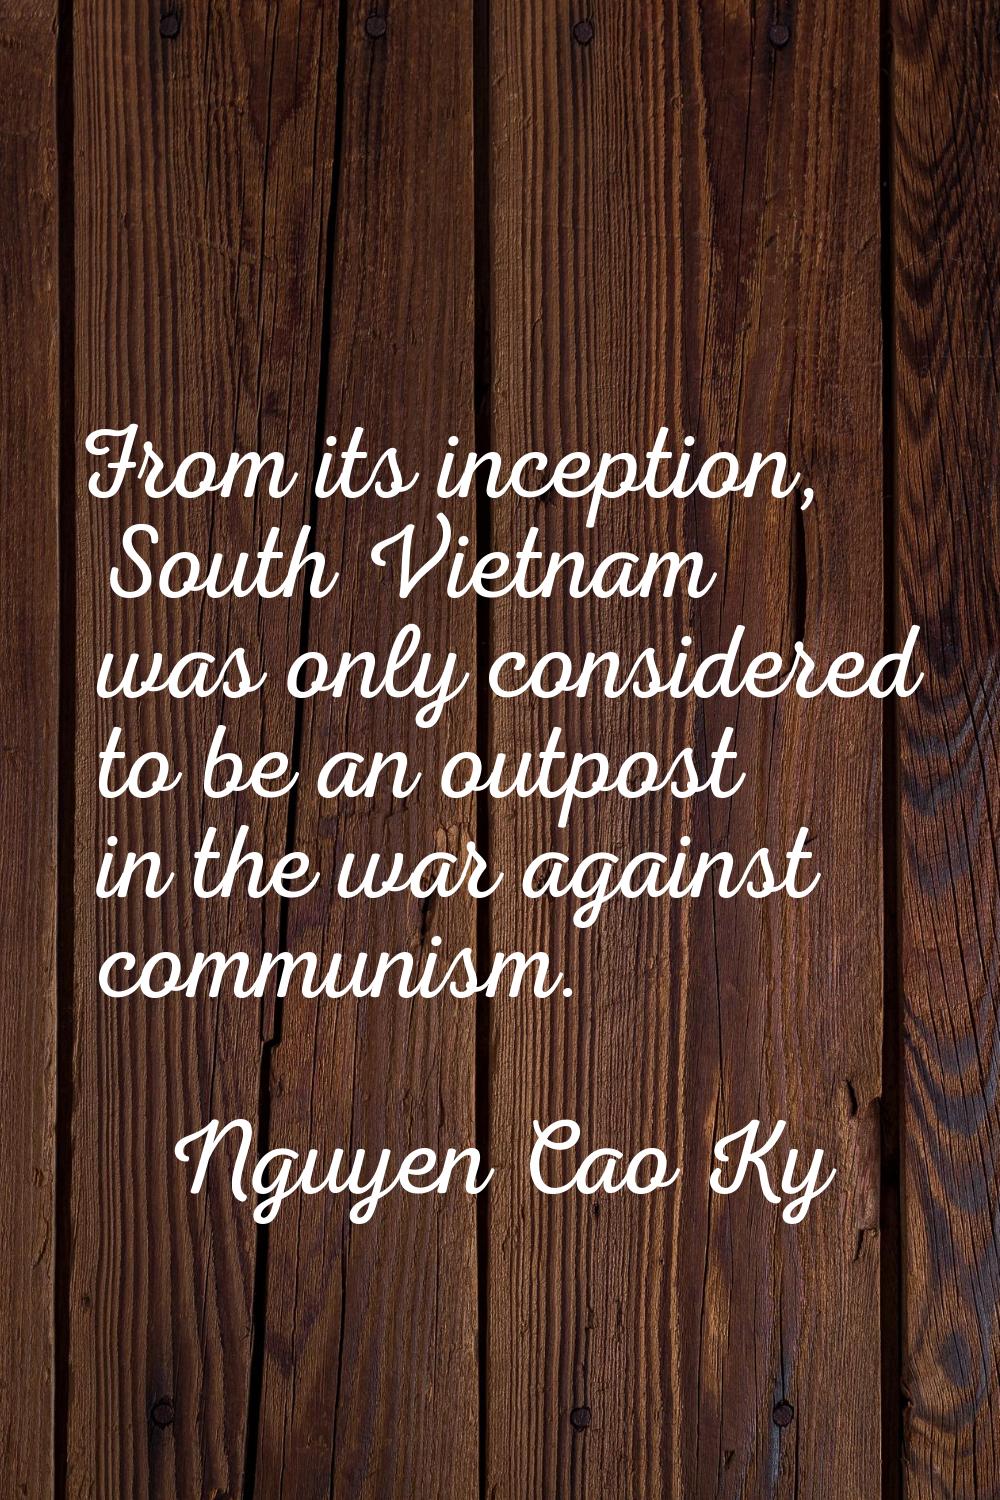 From its inception, South Vietnam was only considered to be an outpost in the war against communism